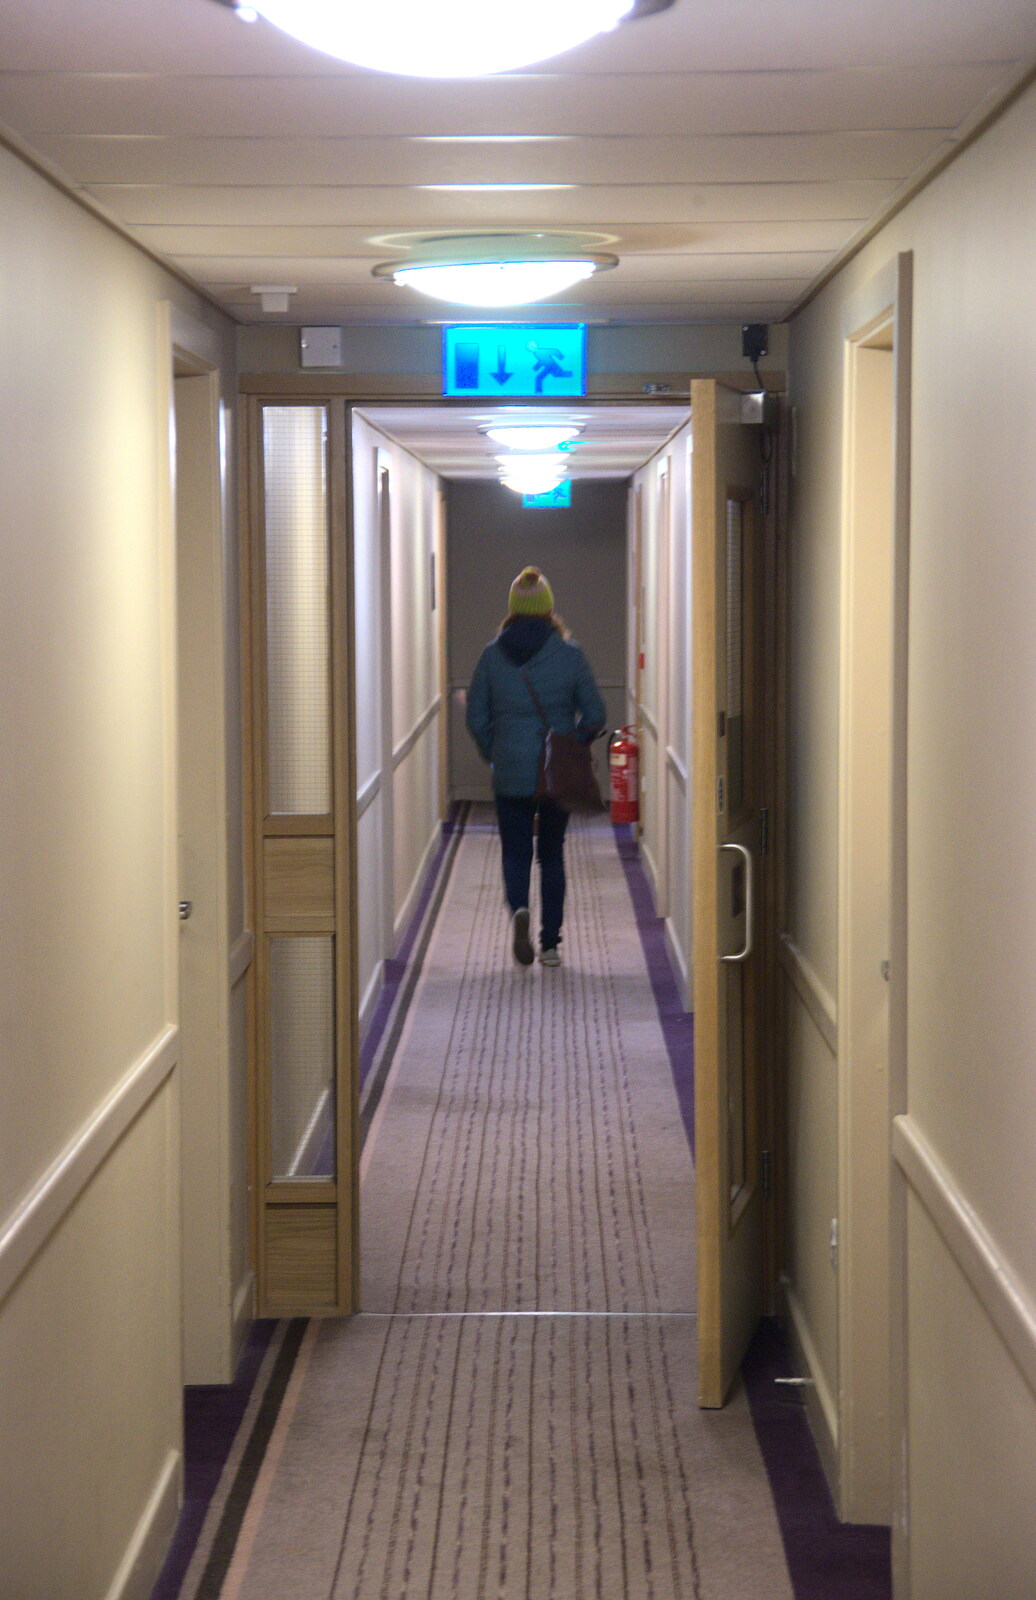 Isobel heads off down a hotel corridor from Thanksgiving in Highcliffe, Dorset - 23rd November 2018